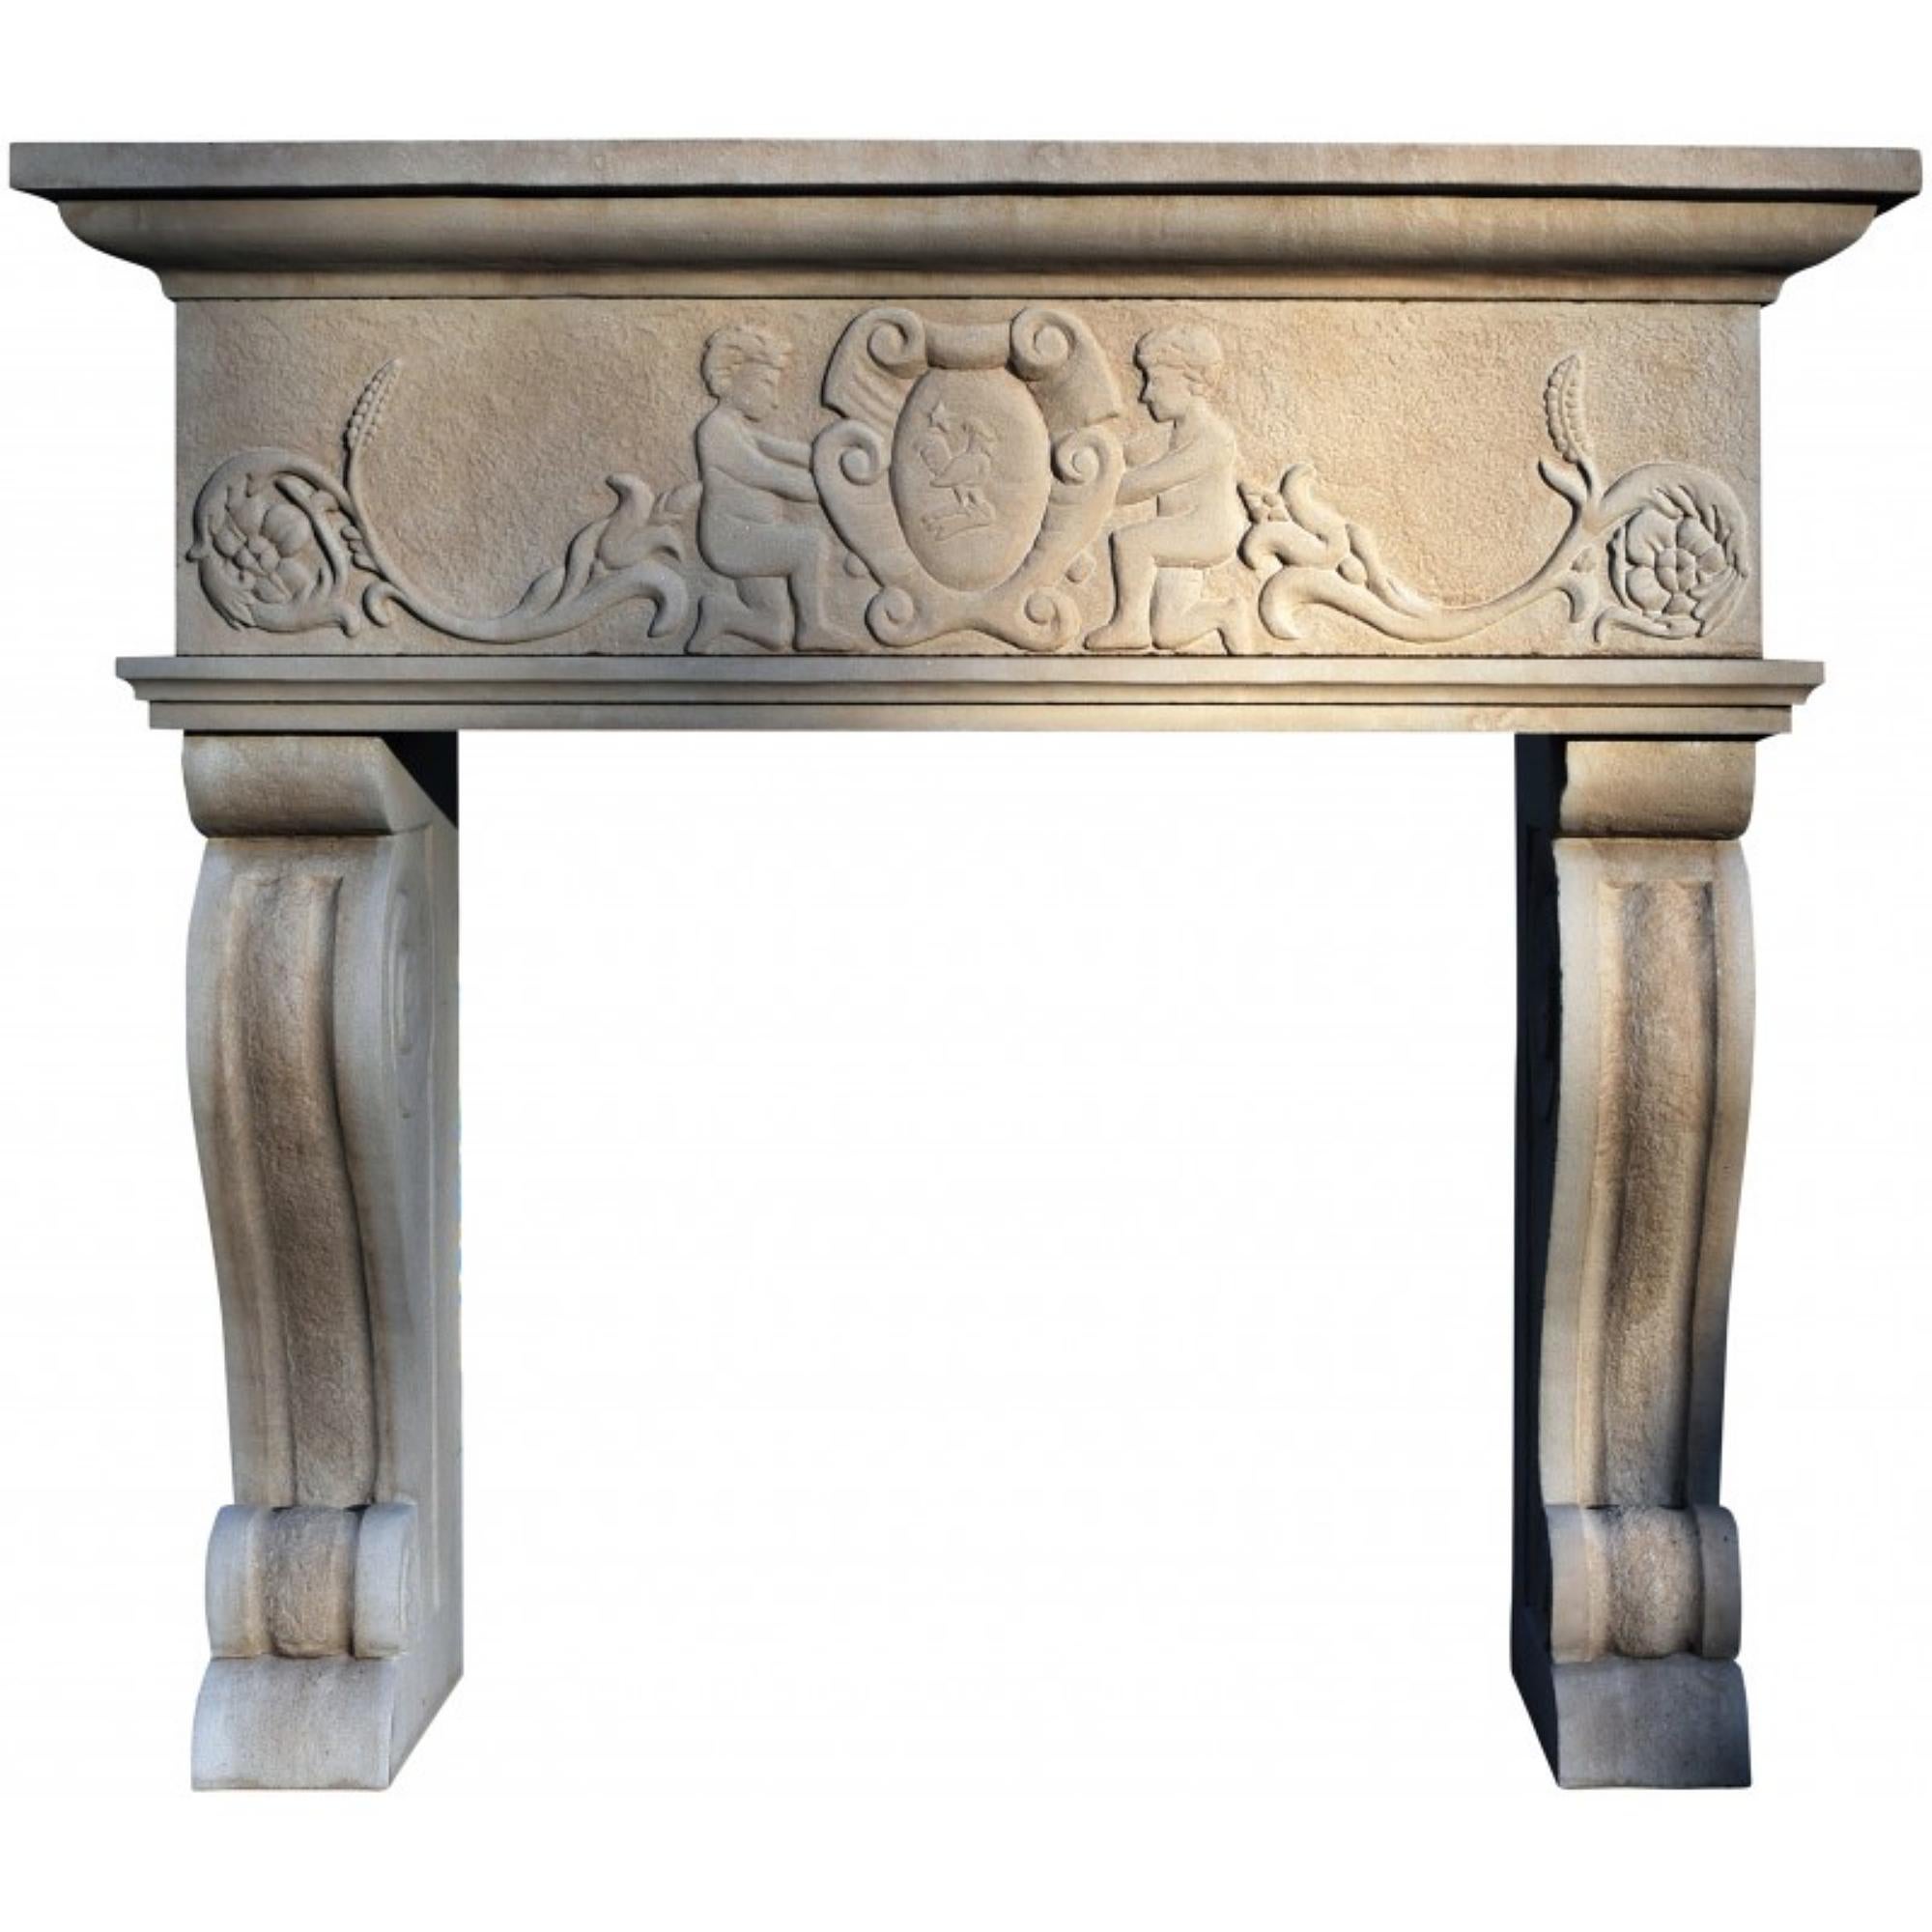 Baroque Italian Fireplace with Emblem and Putti Stone Serena Early 20th Century For Sale